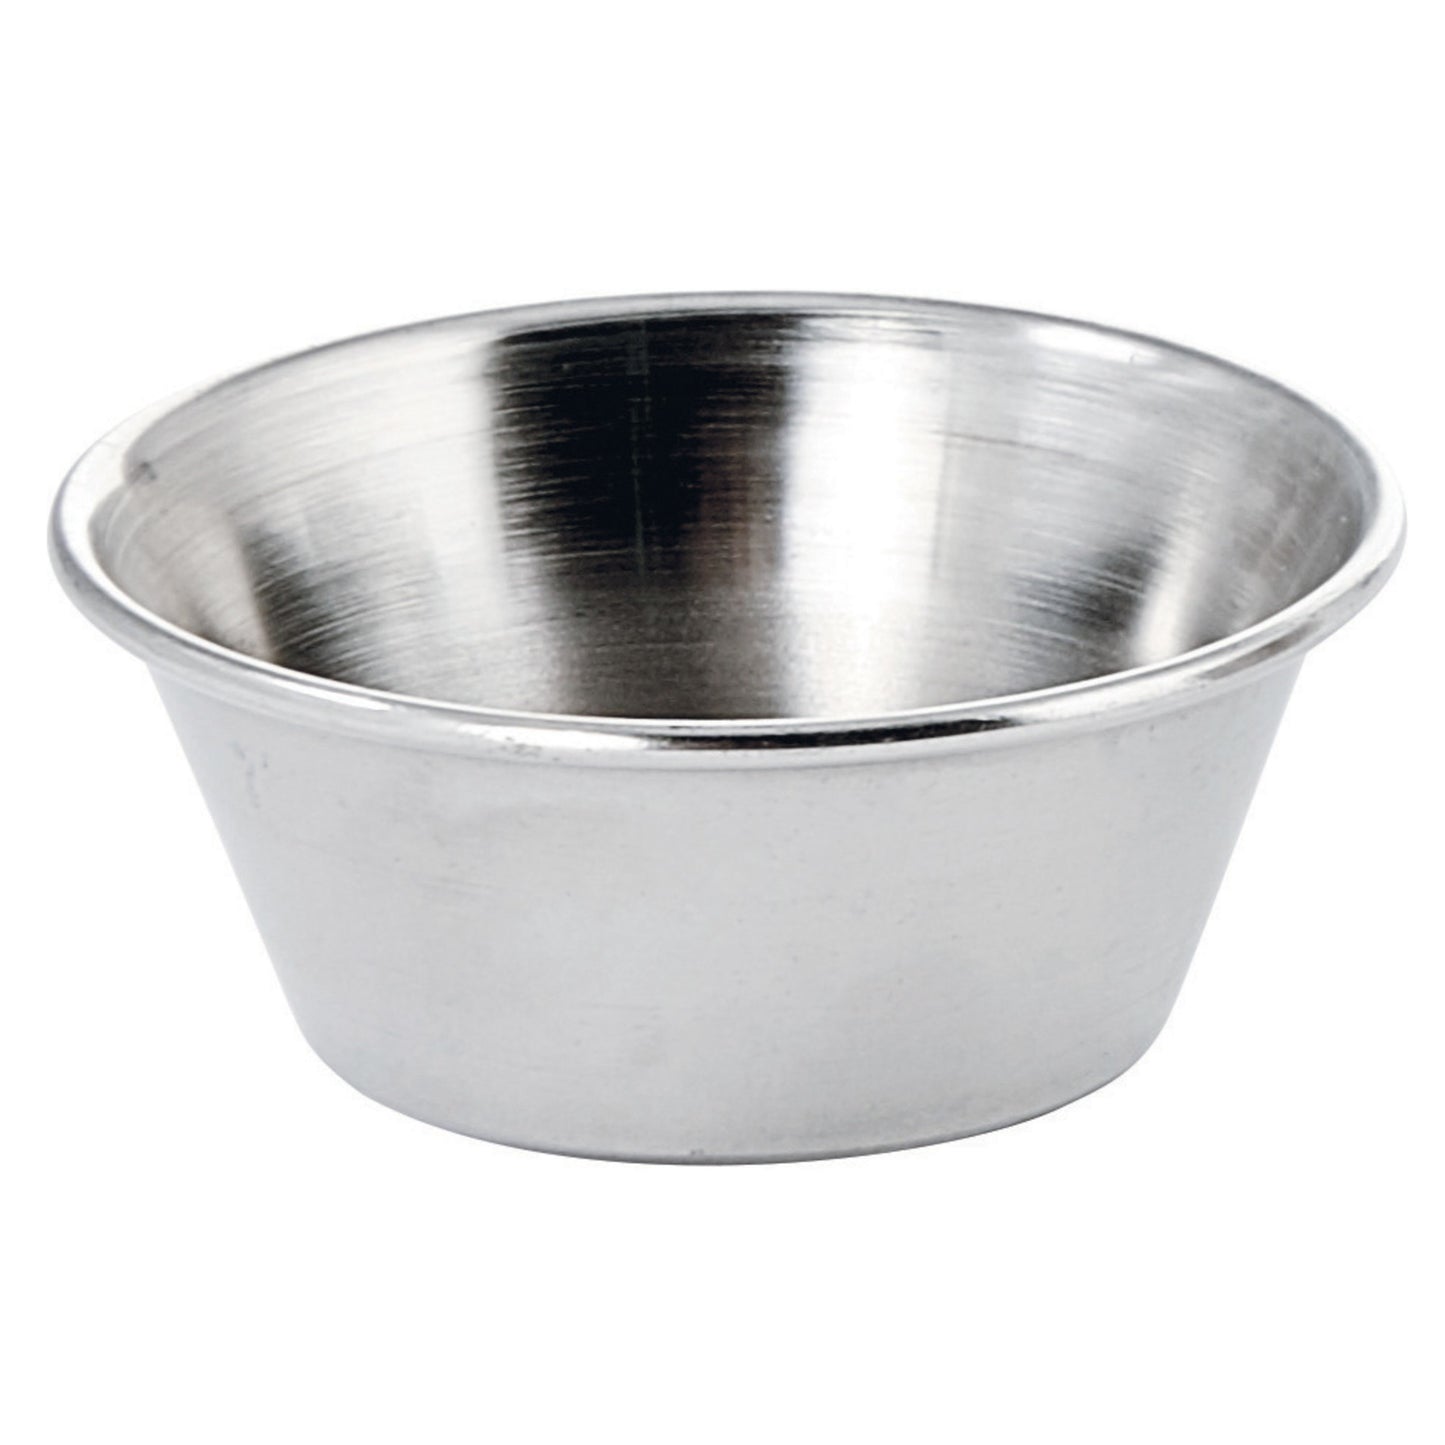 Stainless Steel Sauce Cup - 1-1/2 oz